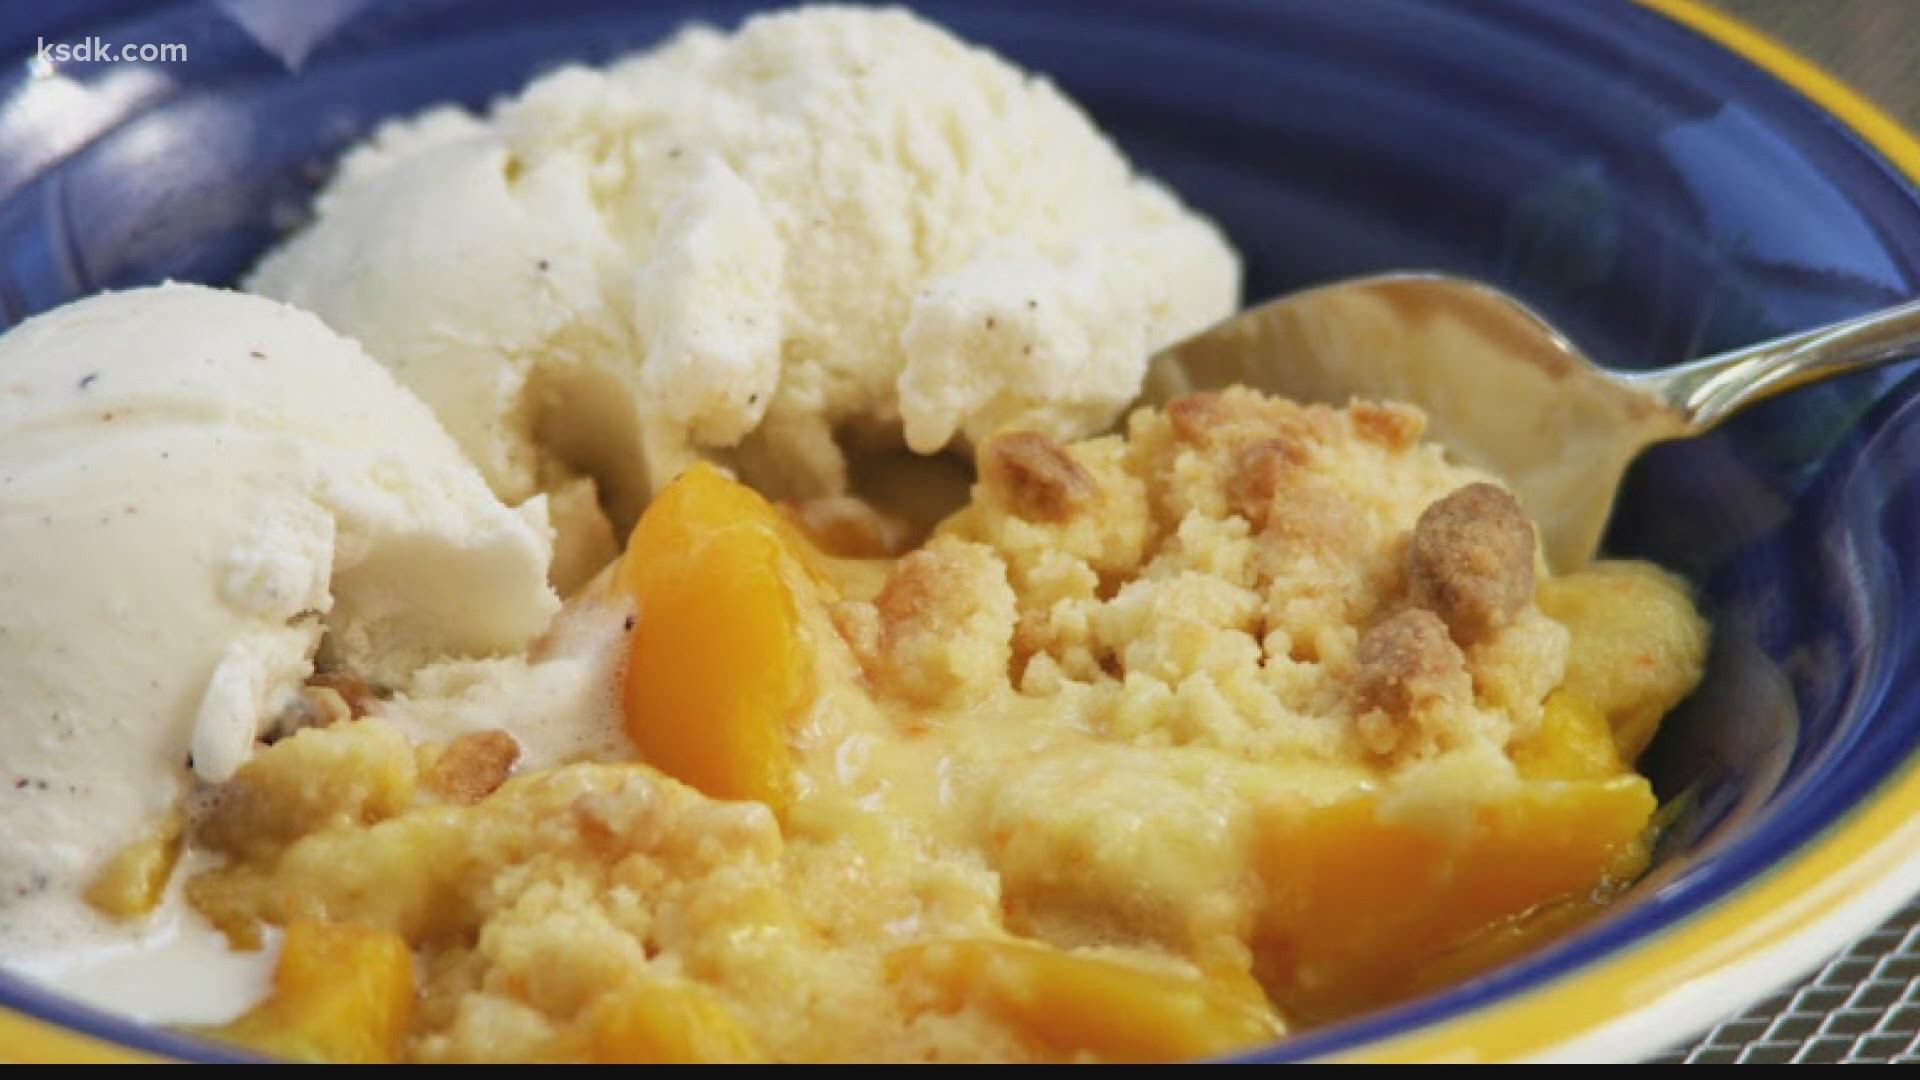 Angie from Eckert’s Orchards is here to share an amazing recipe to make with their peaches!